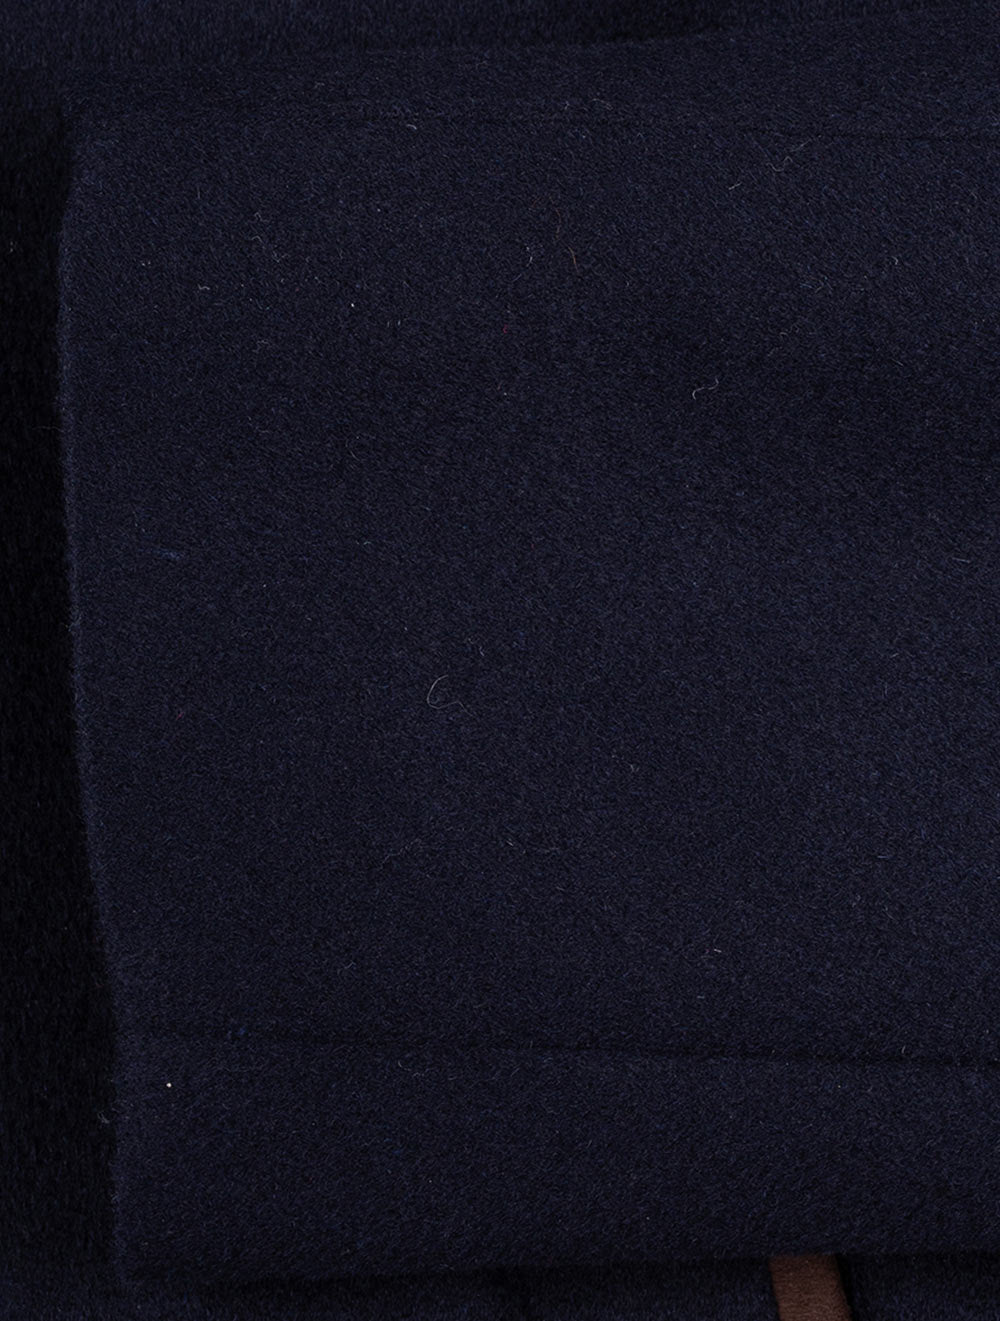 Cashmere Carcoat Navy